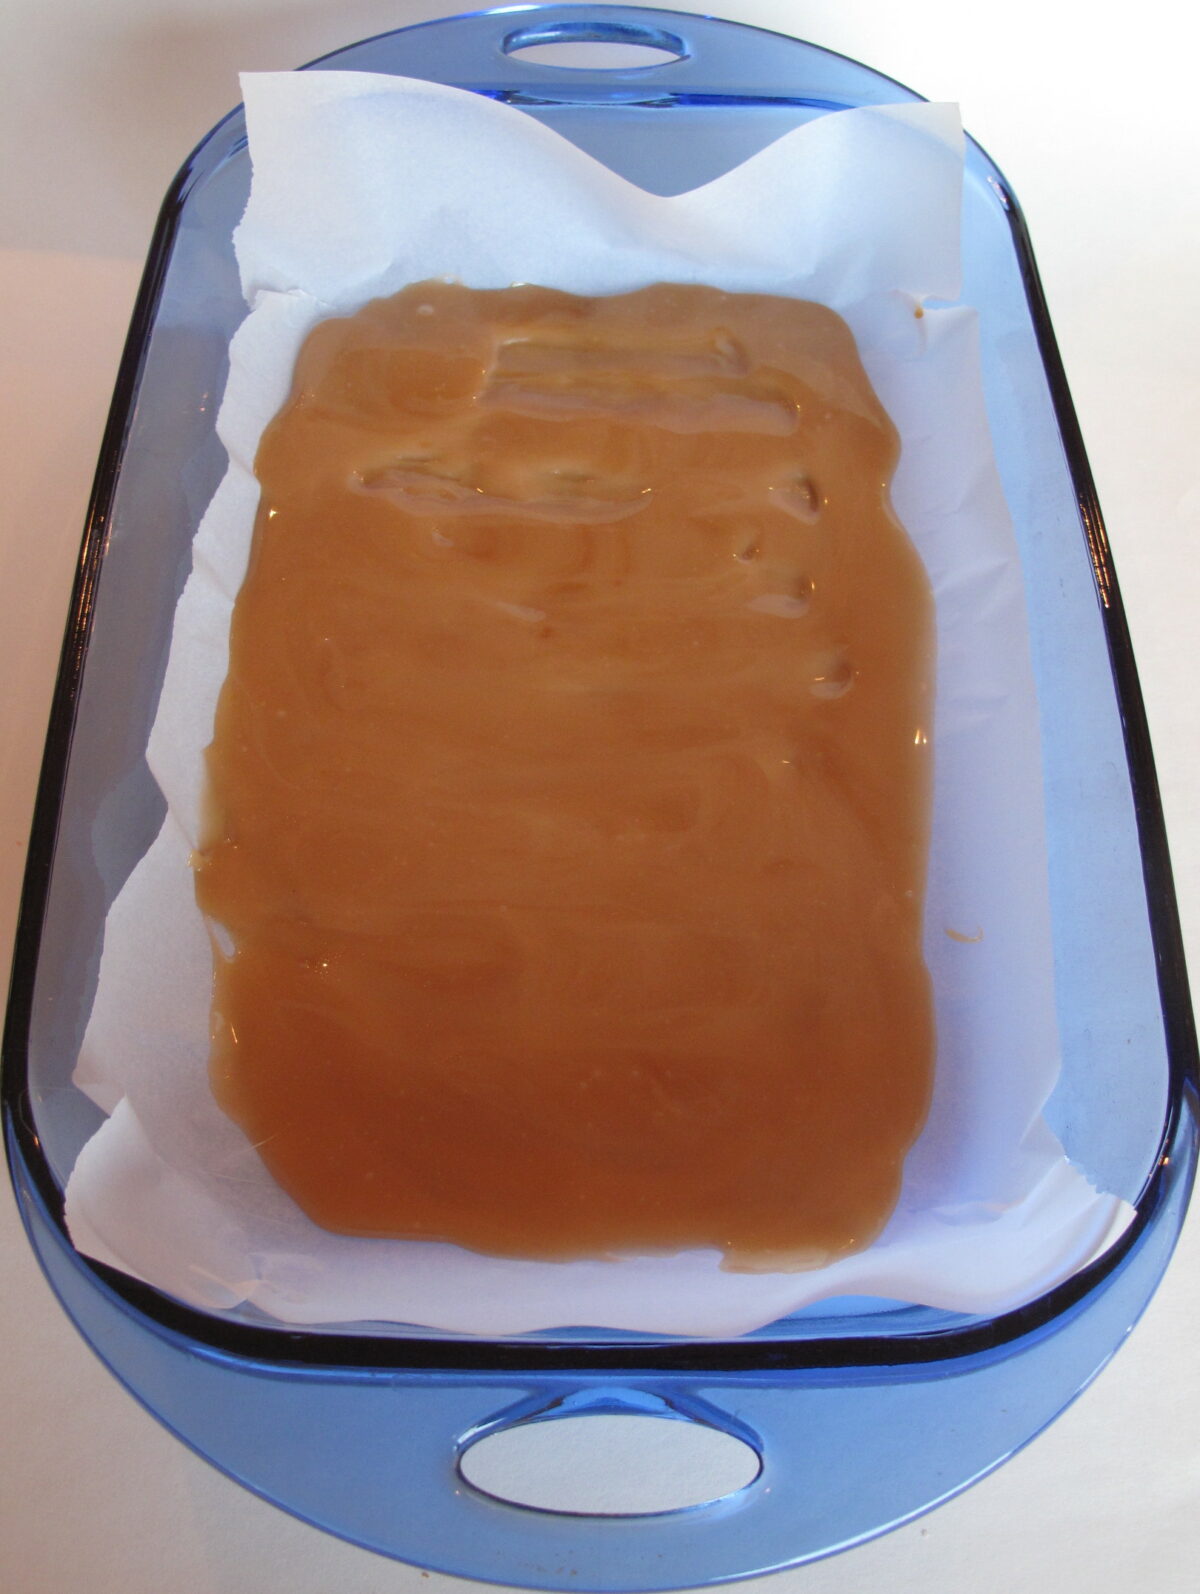 Homemade toffee firming in a blue glass baking dish lined with parchment.